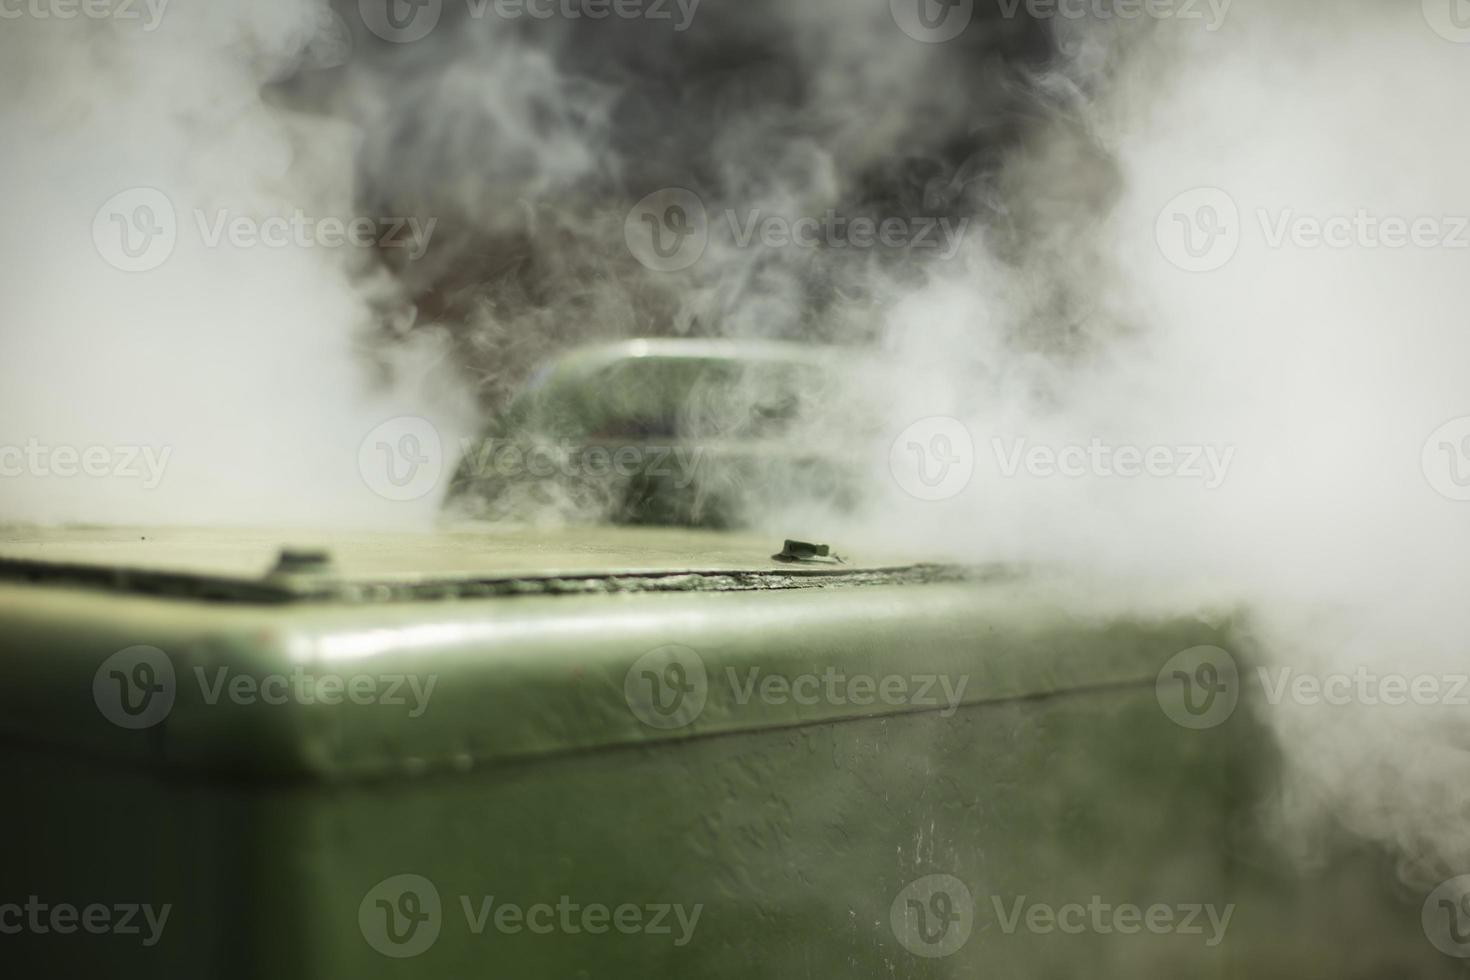 Military field kitchen. Steam from kitchen outside. Smoke from burning. Cooking in army is in detail. photo